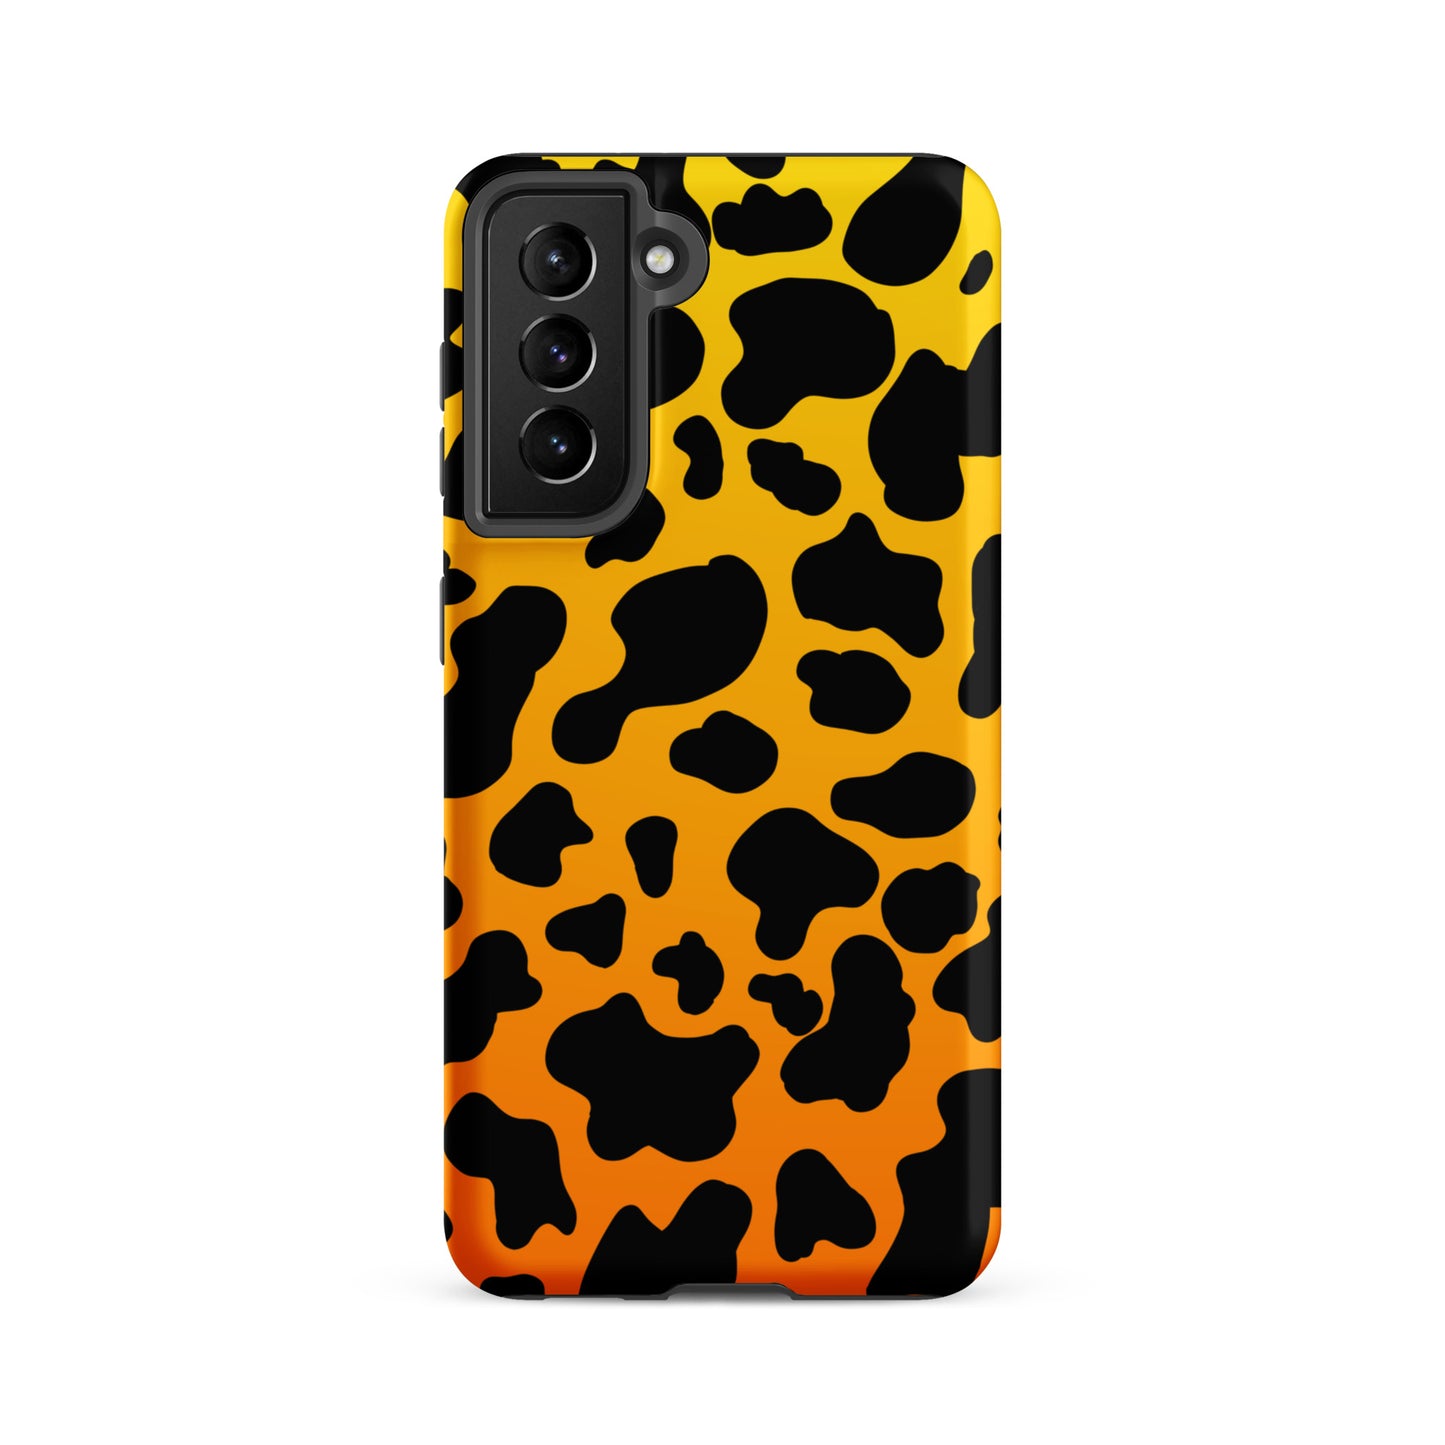 Could Be a Cheetah Samsung® Case